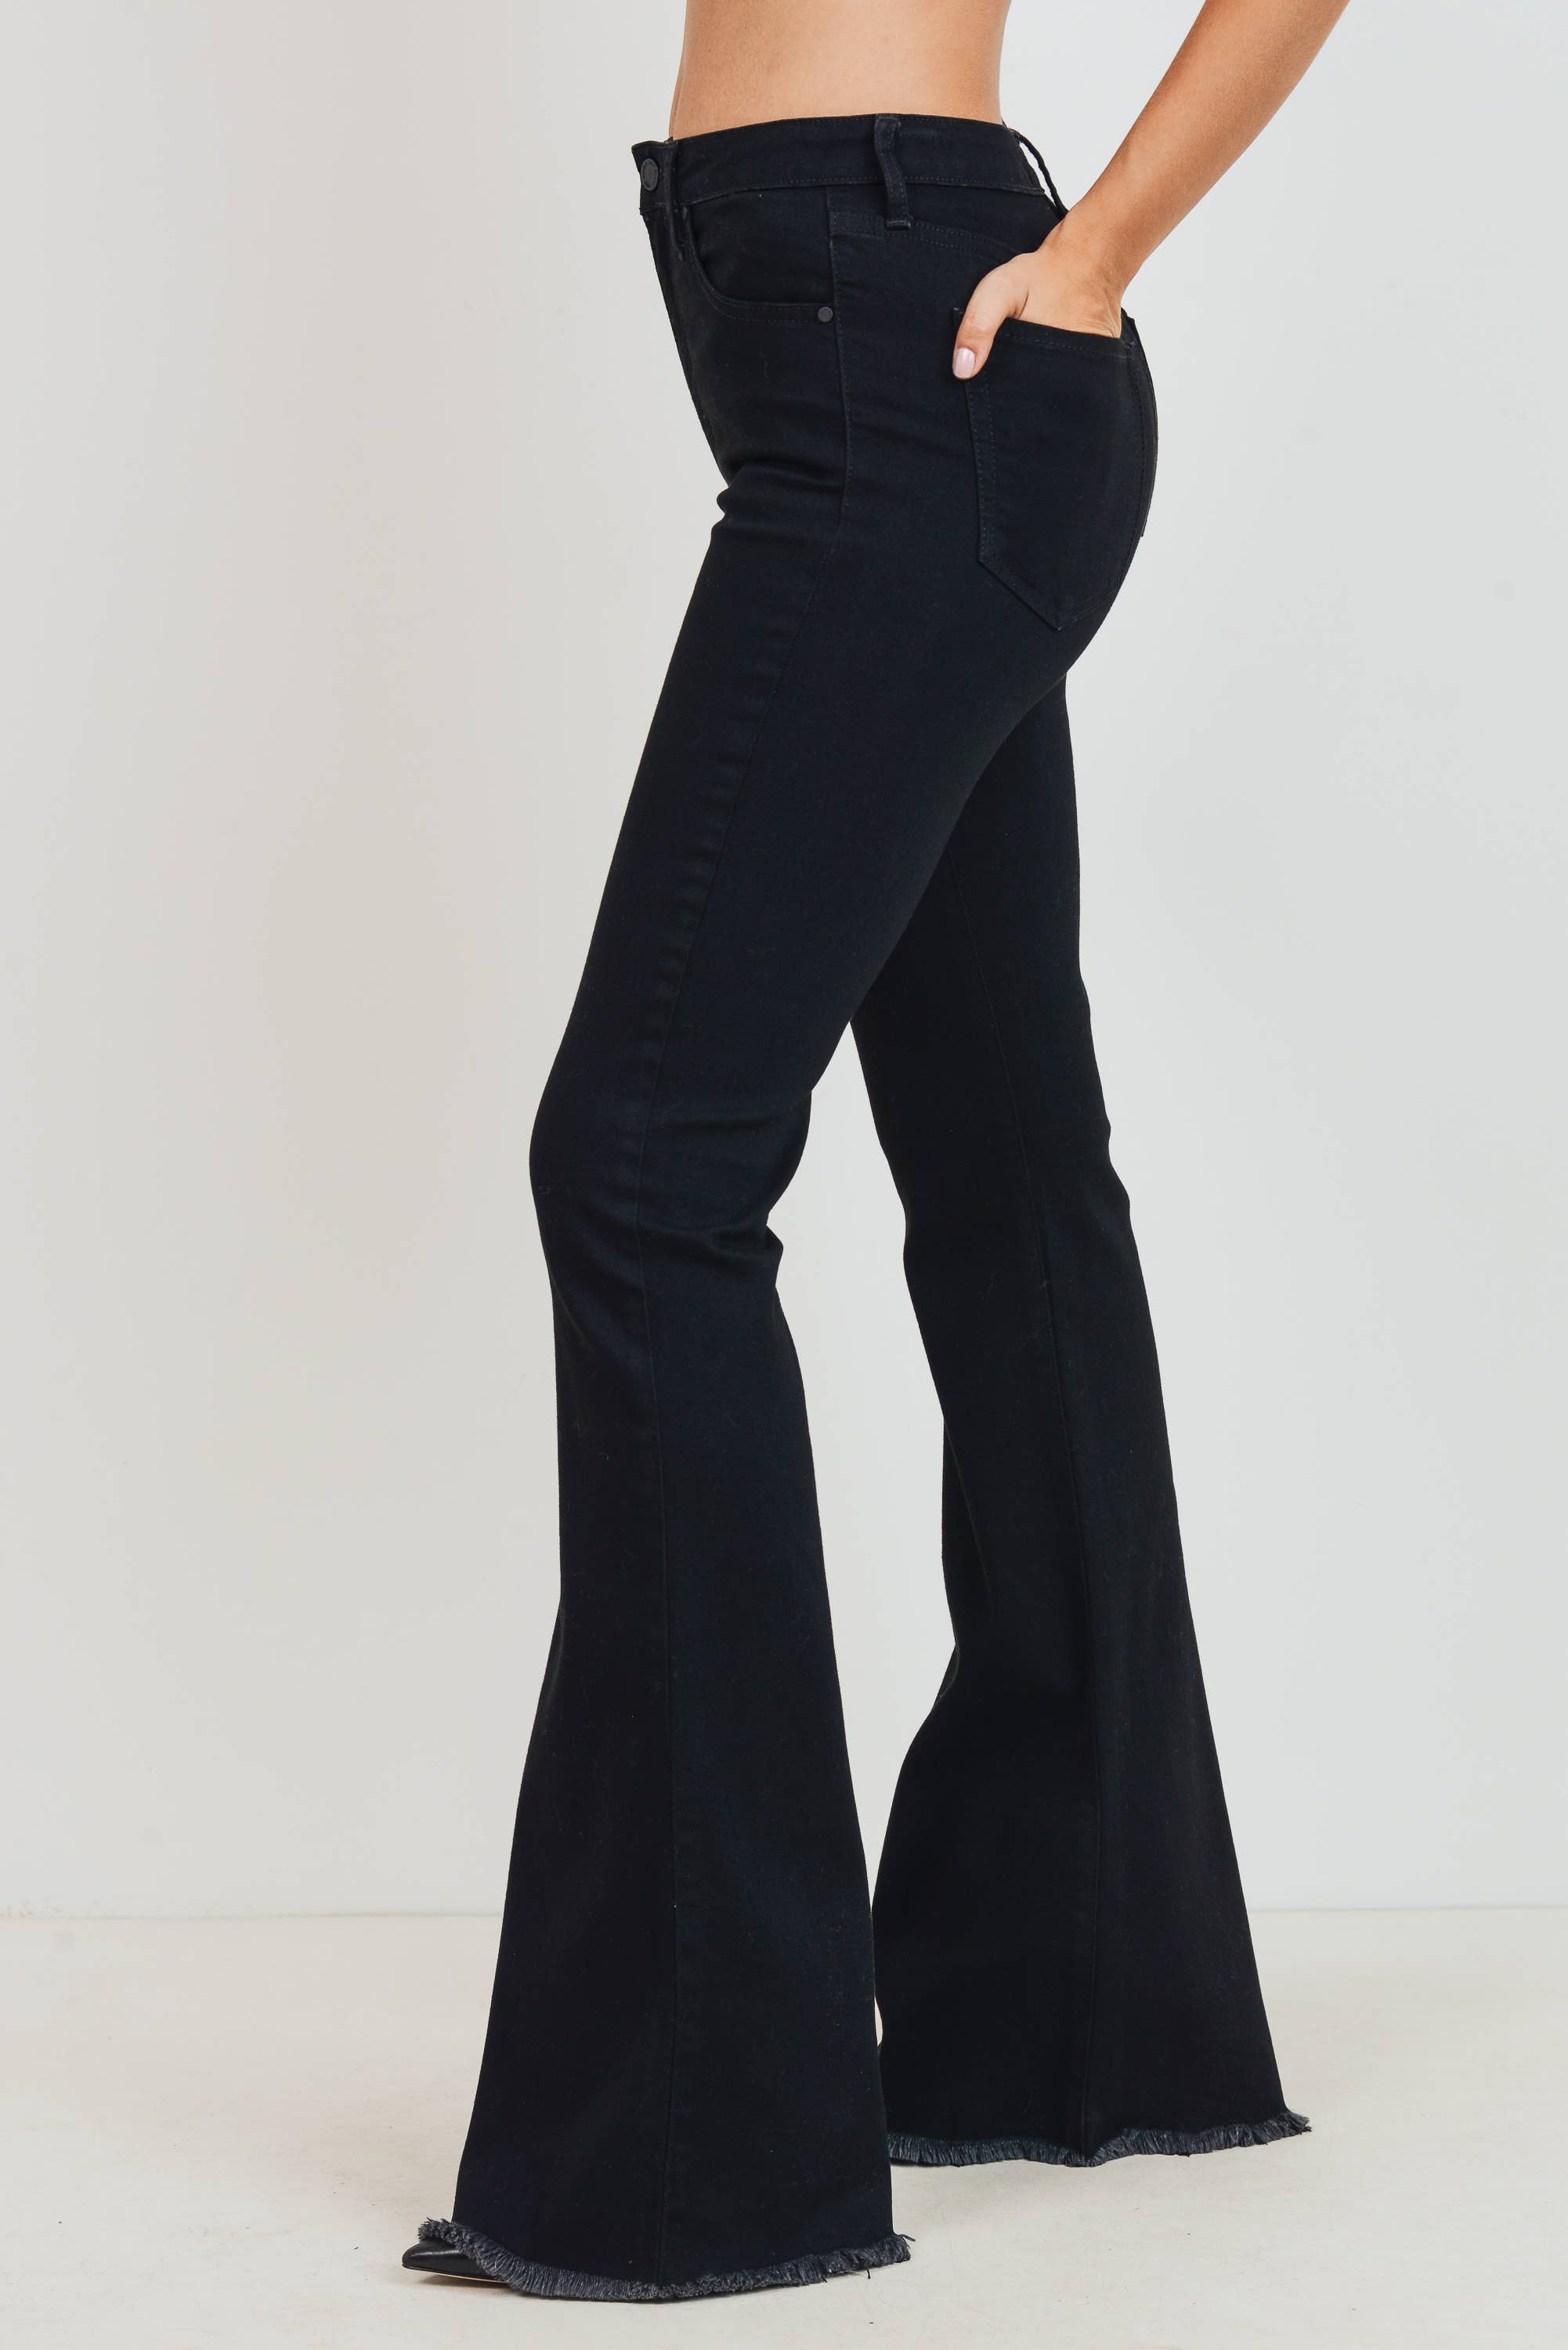 The Classic High Rise Bell Bottom Jeans By Just Black Denim